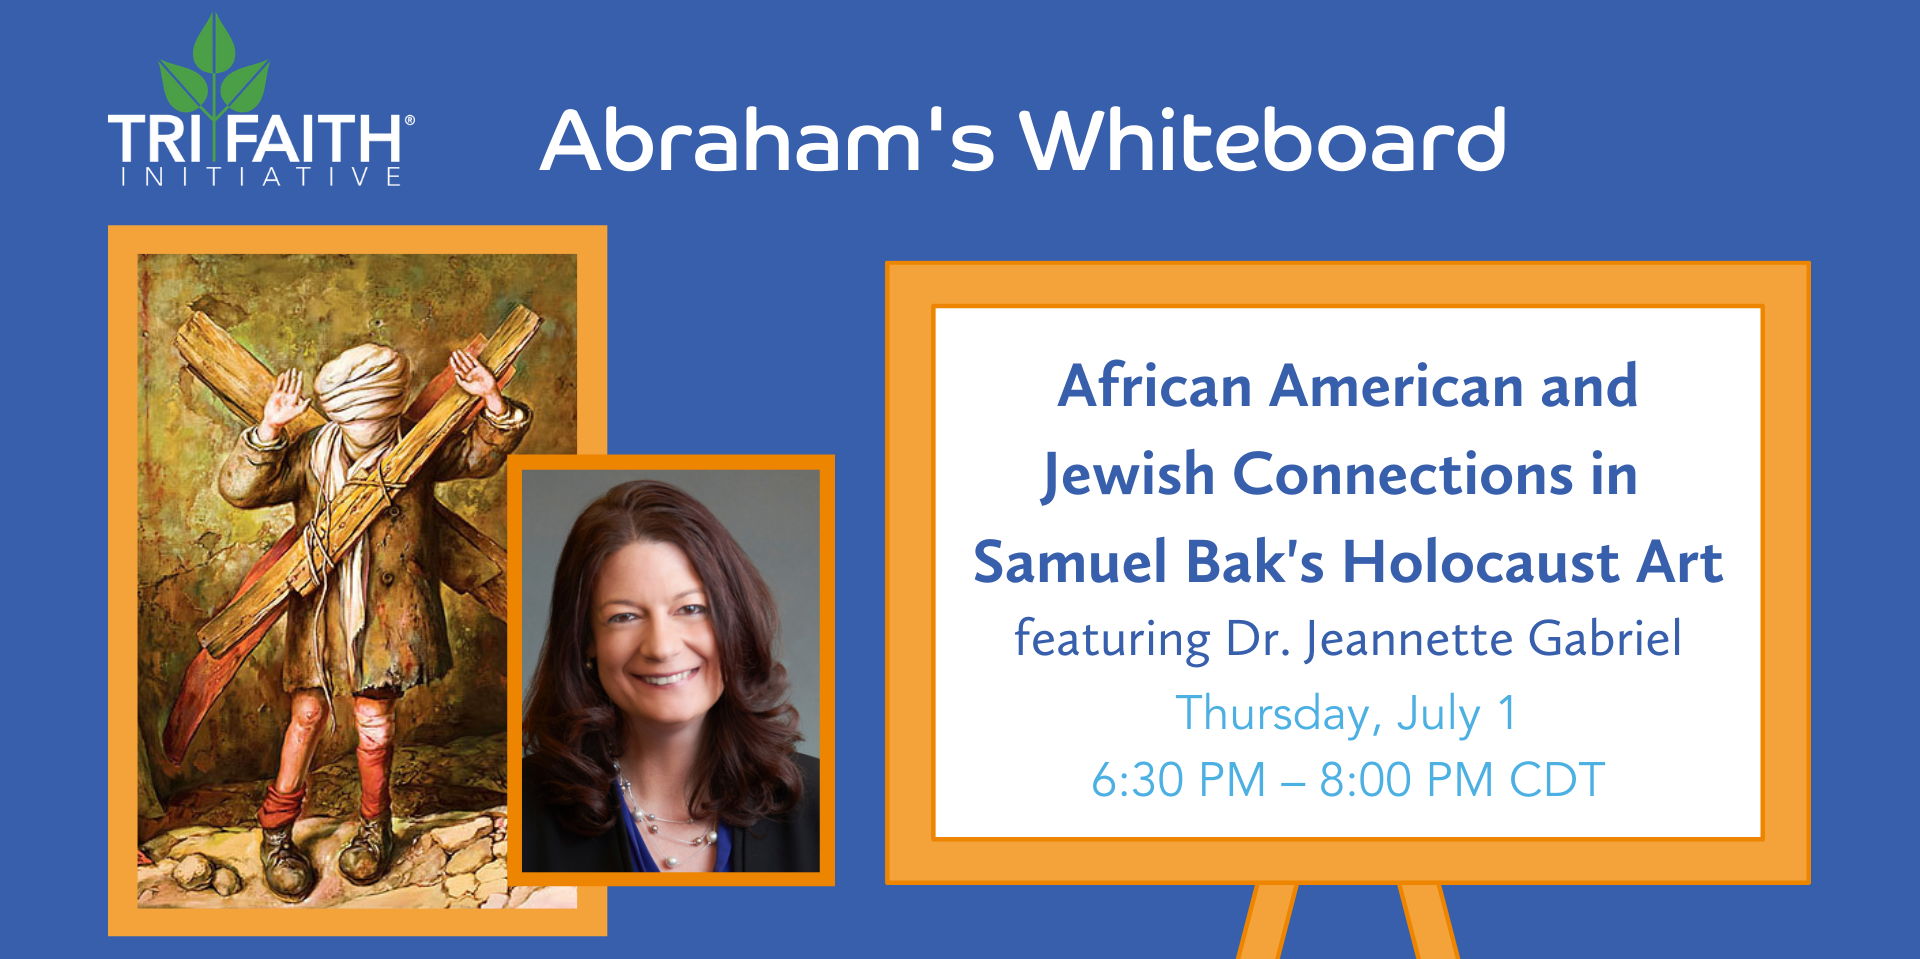 Abraham’s Whiteboard: African American and Jewish Connections in Samuel Bak's Holocaust Art promotional image